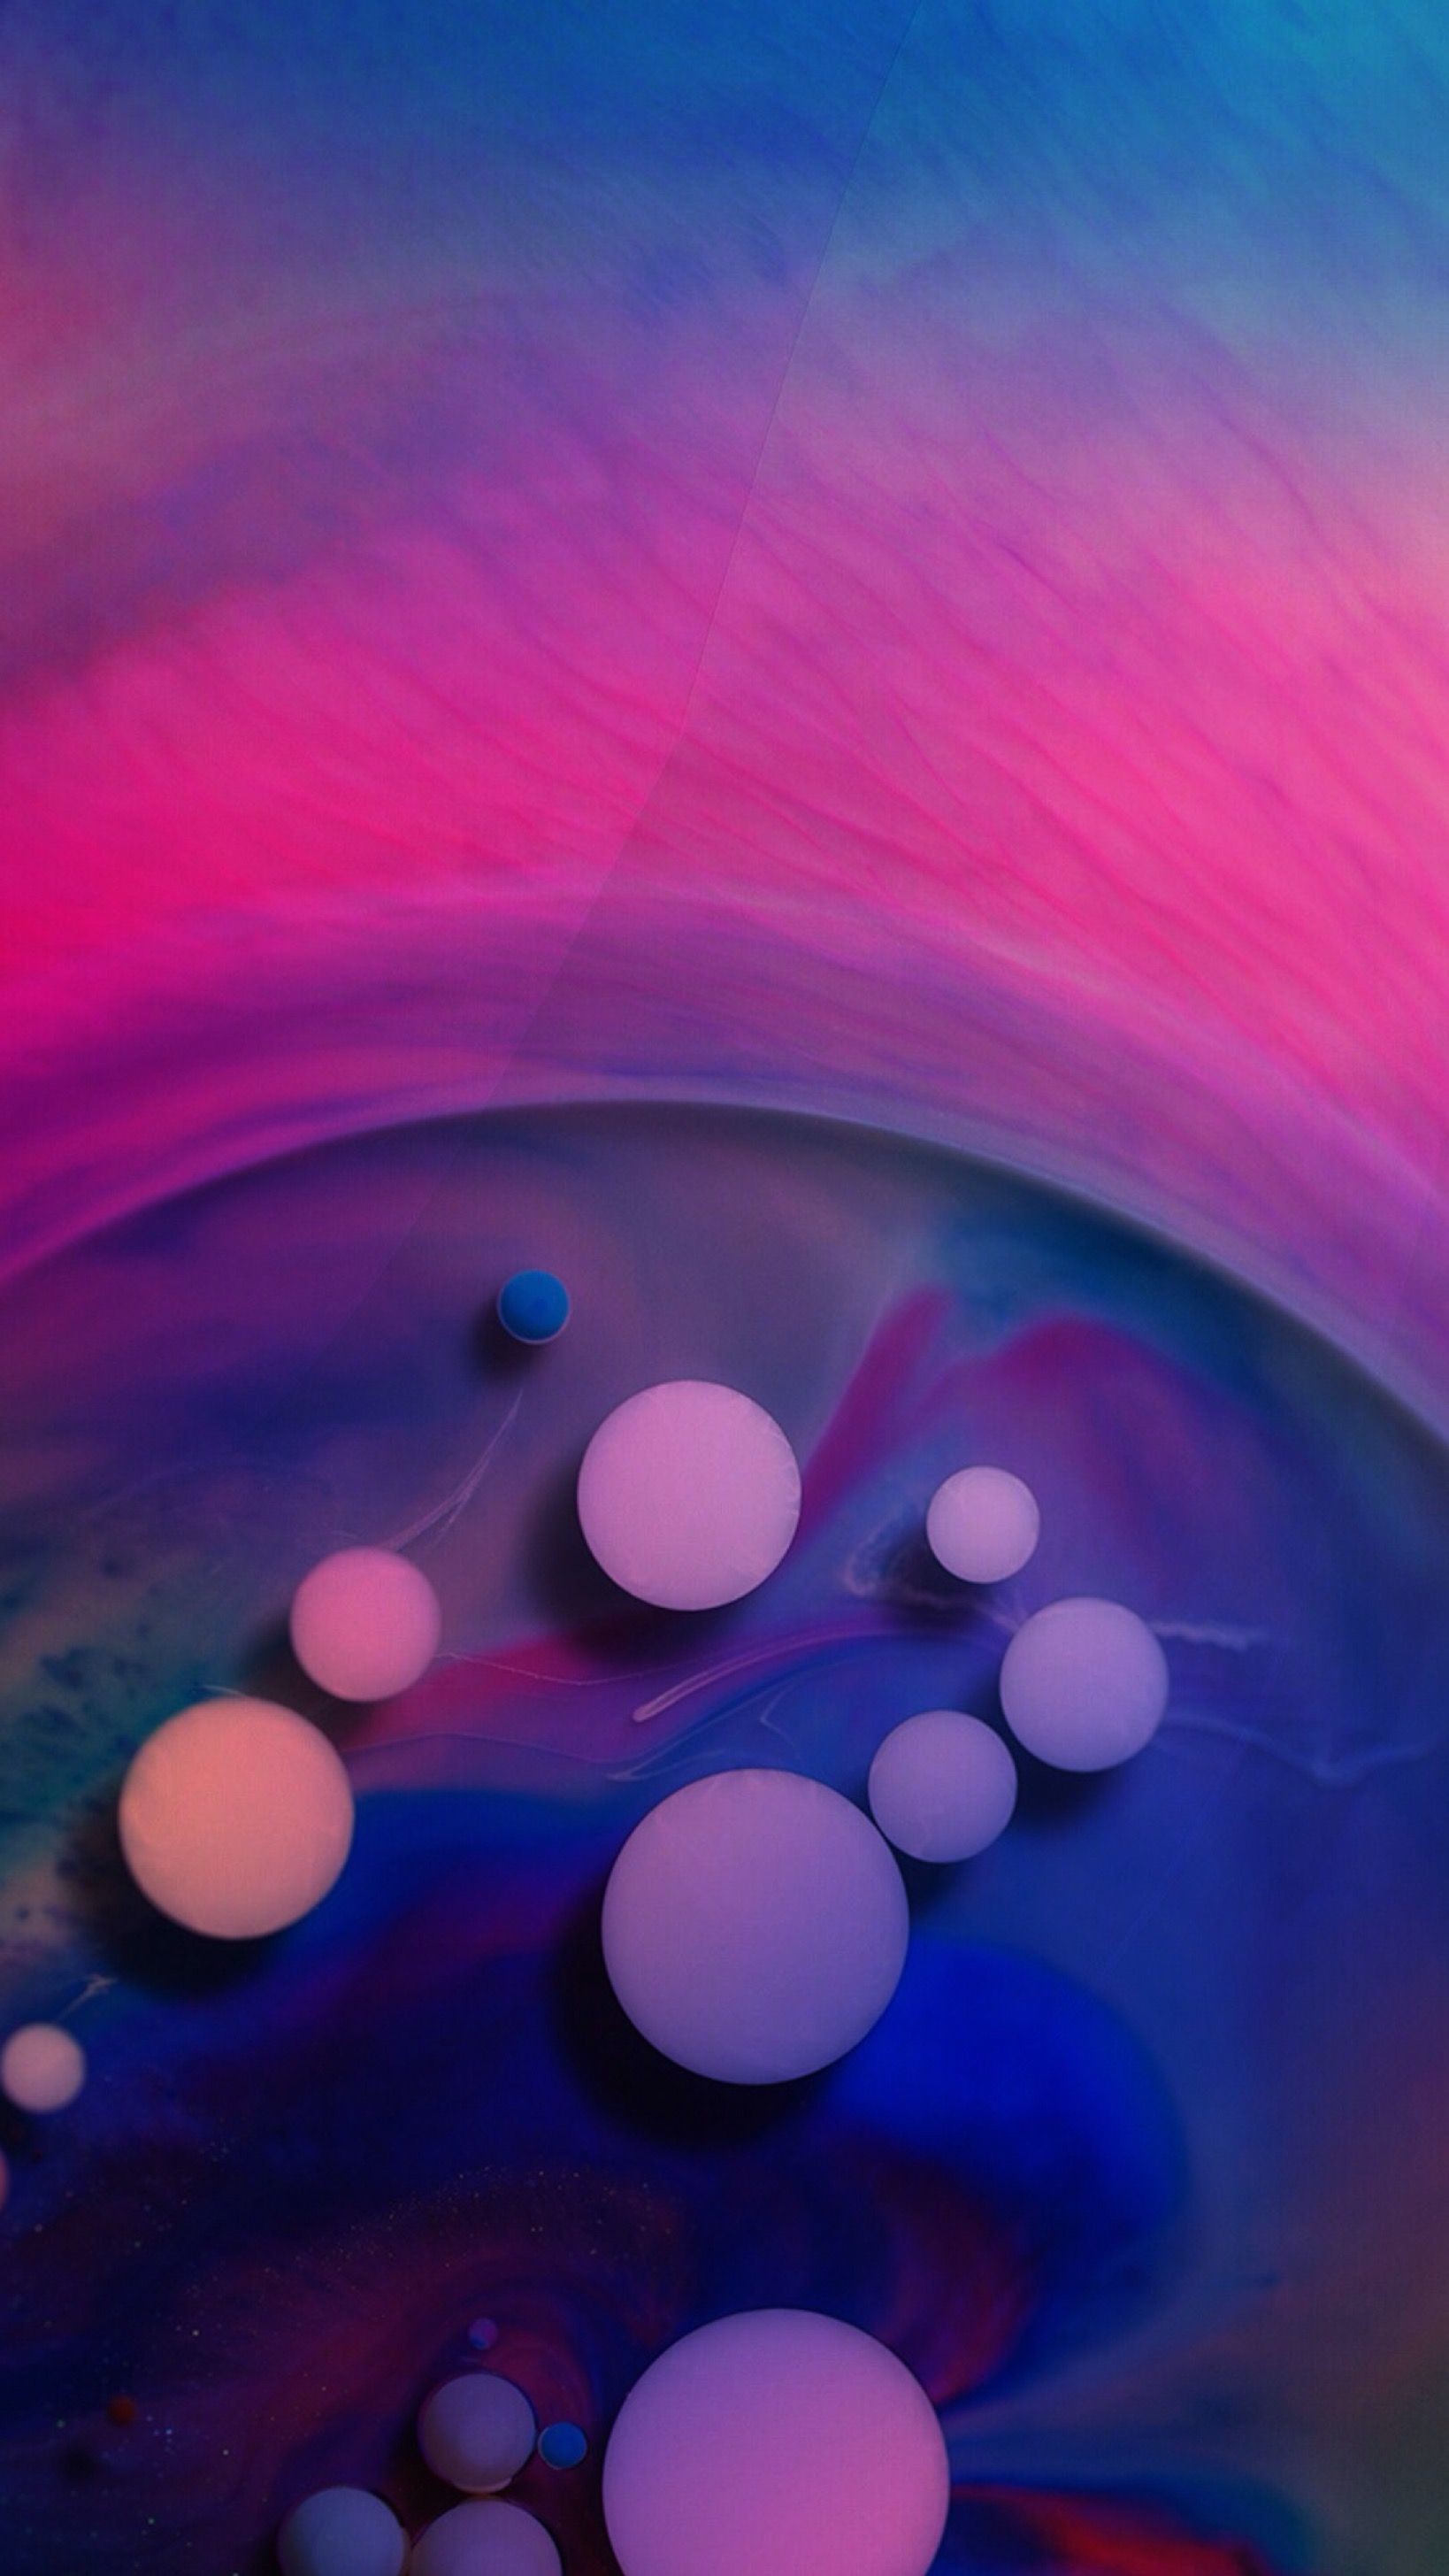 1638x2911 Wallpaper S, Apple Wallpaper, Colorful Wallpaper, Wallpaper Backgrounds,  Iphone Wallpapers, Abstract